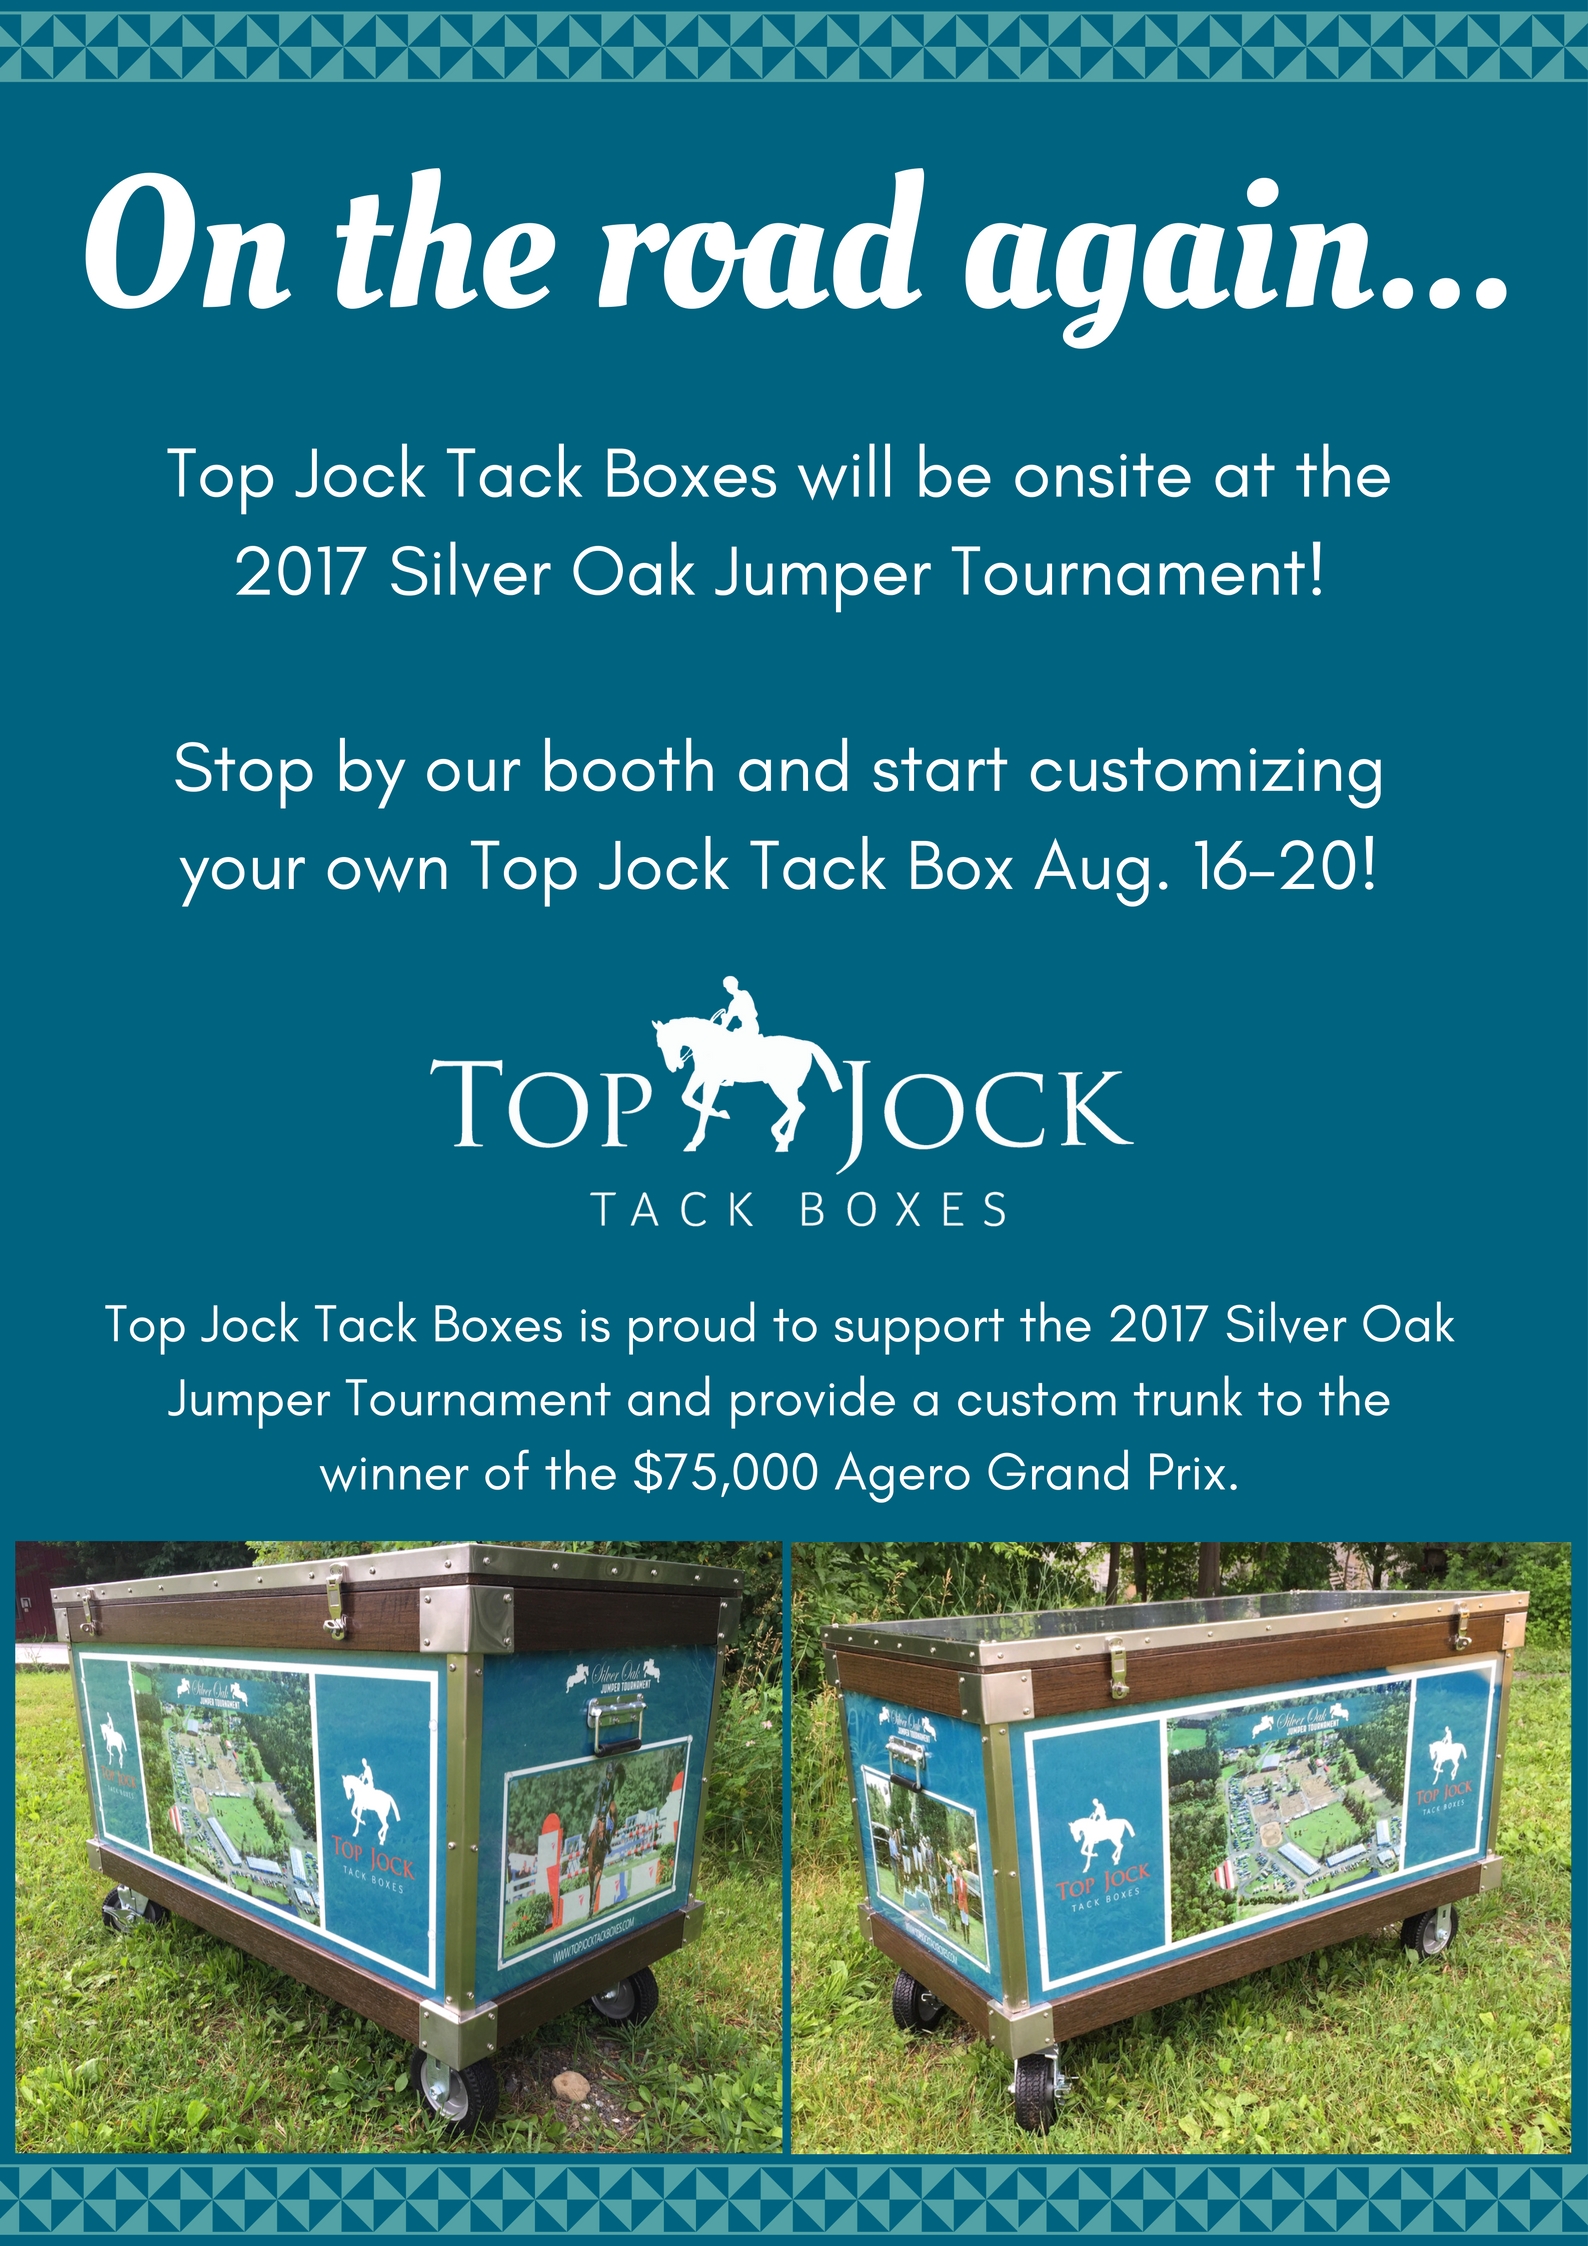 Top Jock Tack Boxes Heads to Silver Oak Jumper Tournament This Week!